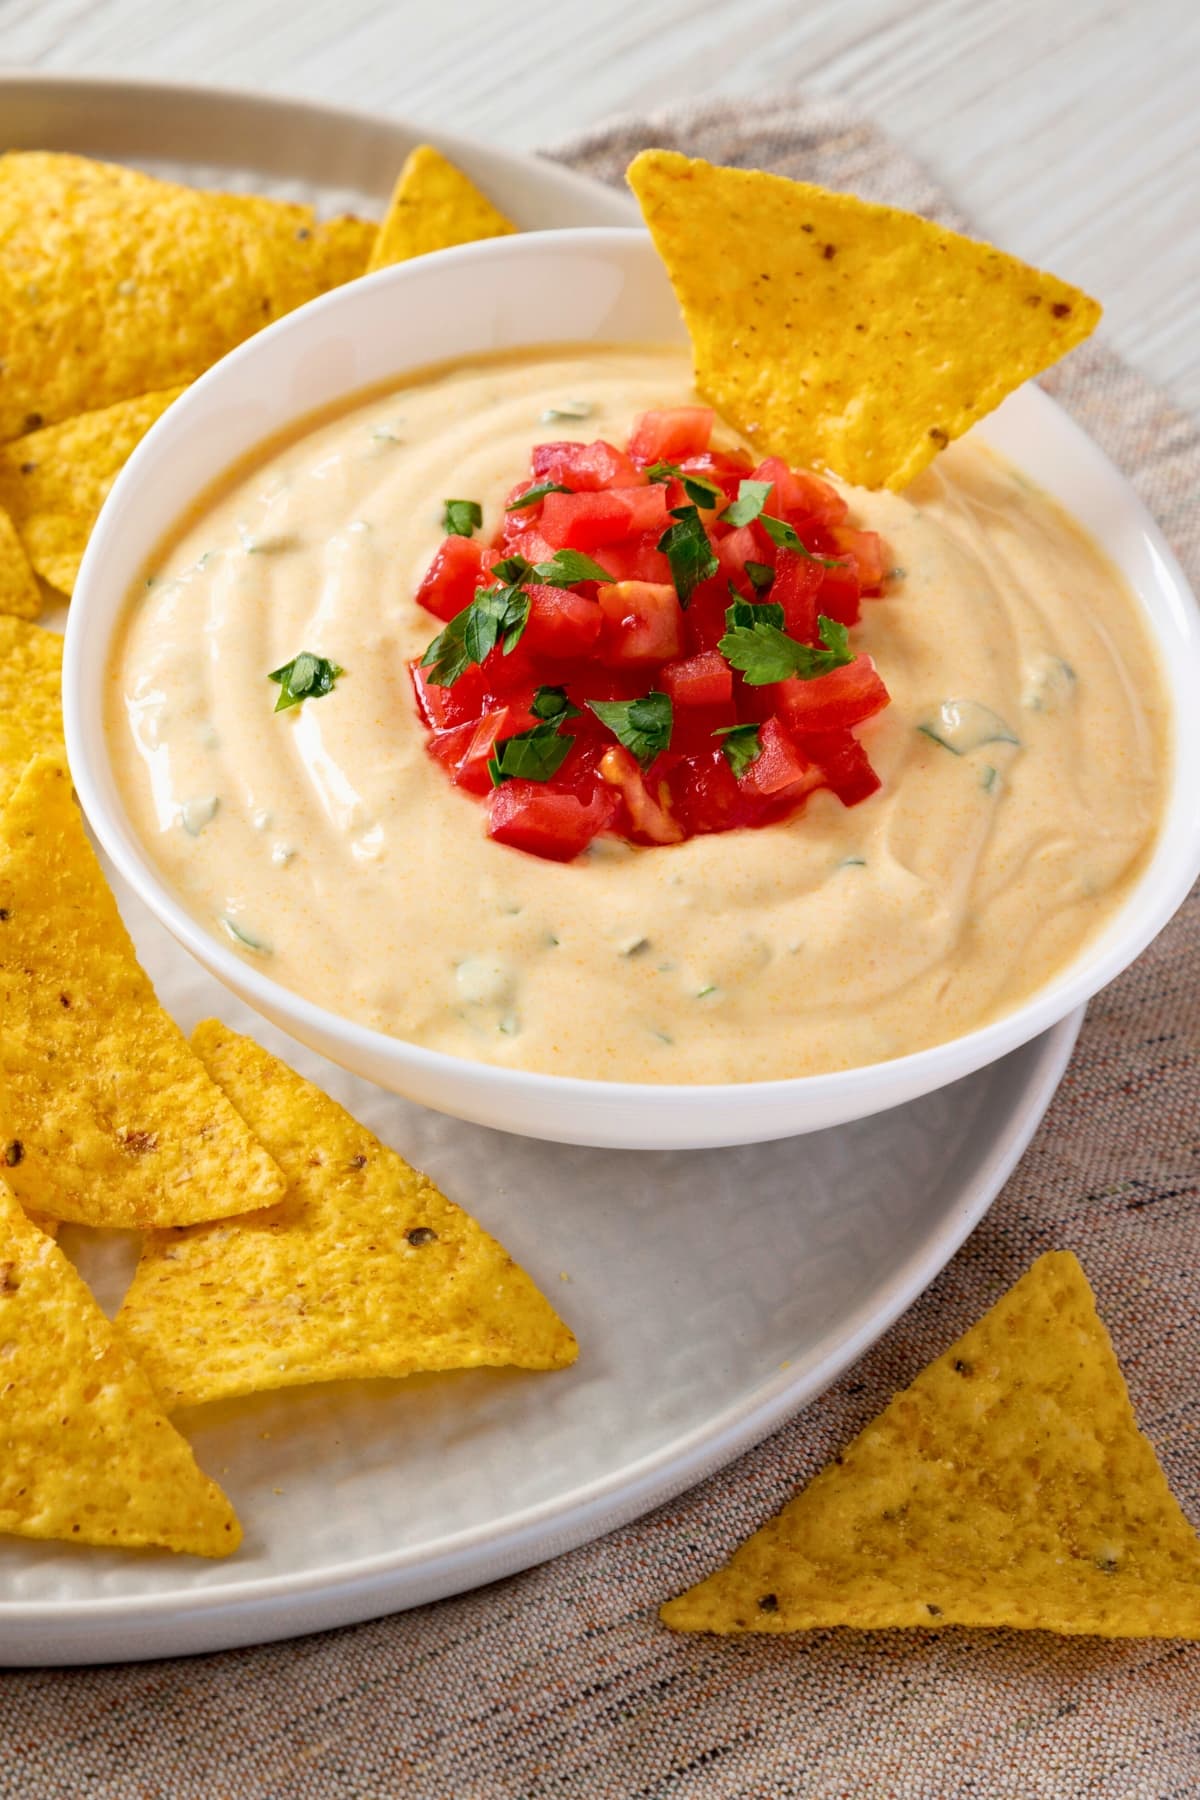 Tortilla chips with white queso dip in a bowl garnished with salsa.